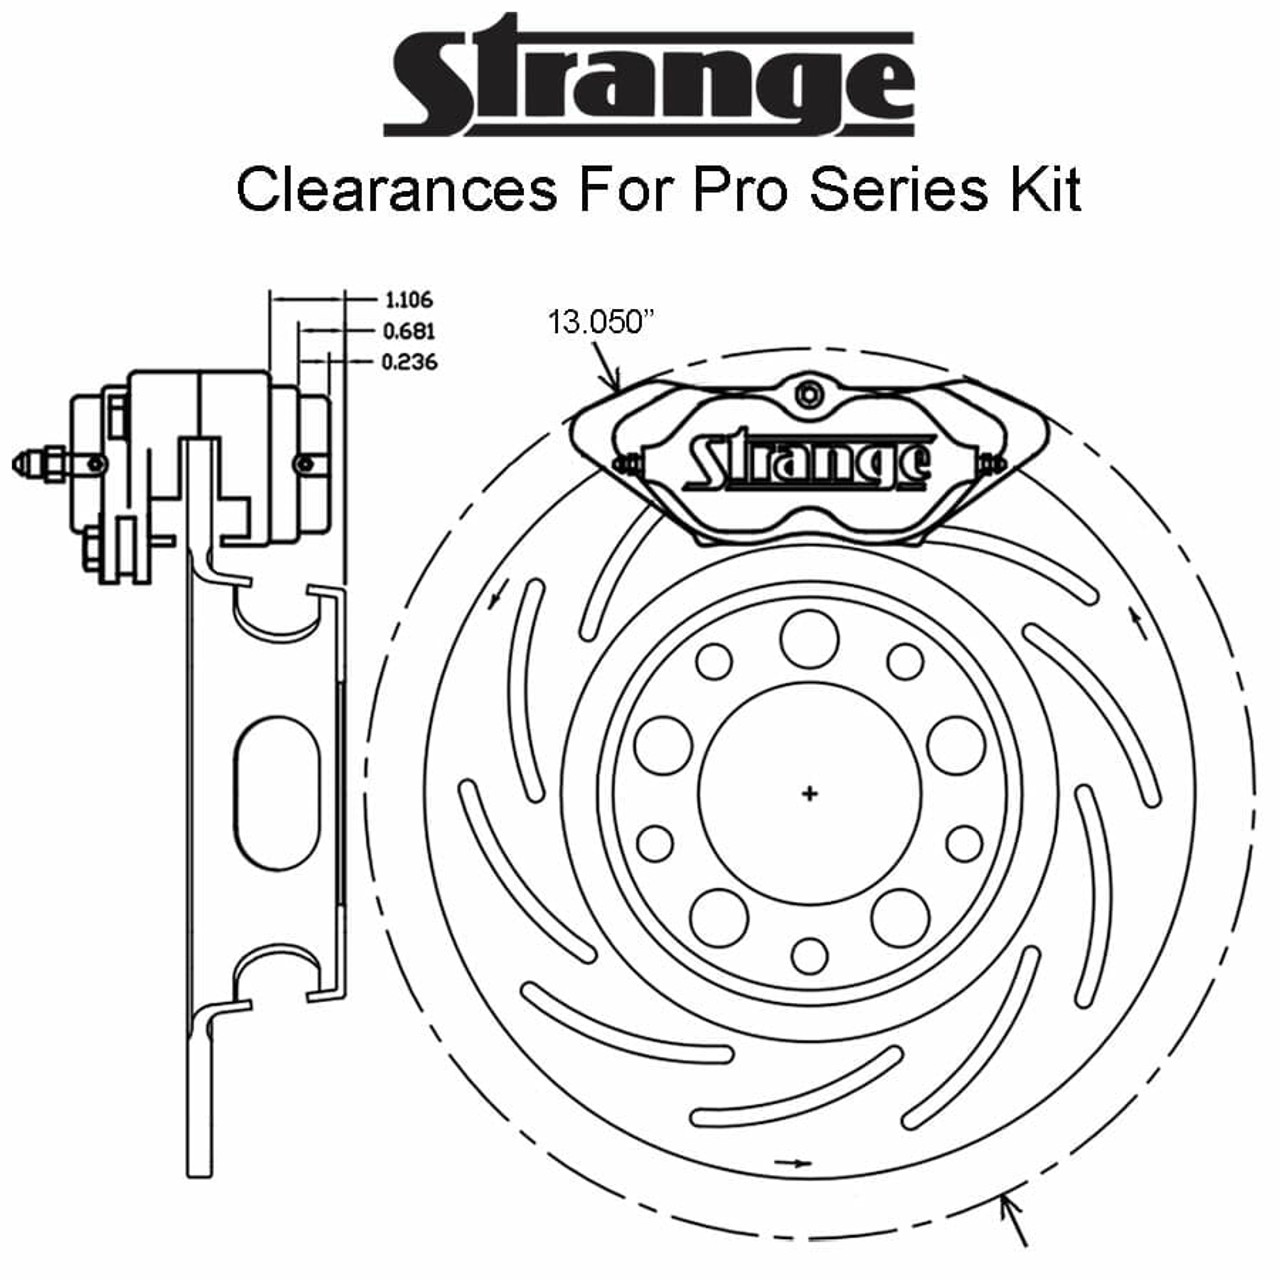 Strange Pro Series Dual Rear Brake Kit For 05-14 Mustang With OEM Ends 1 Pc Rotors, 4 Piston Calipers & DRM-35 Metallic Pads